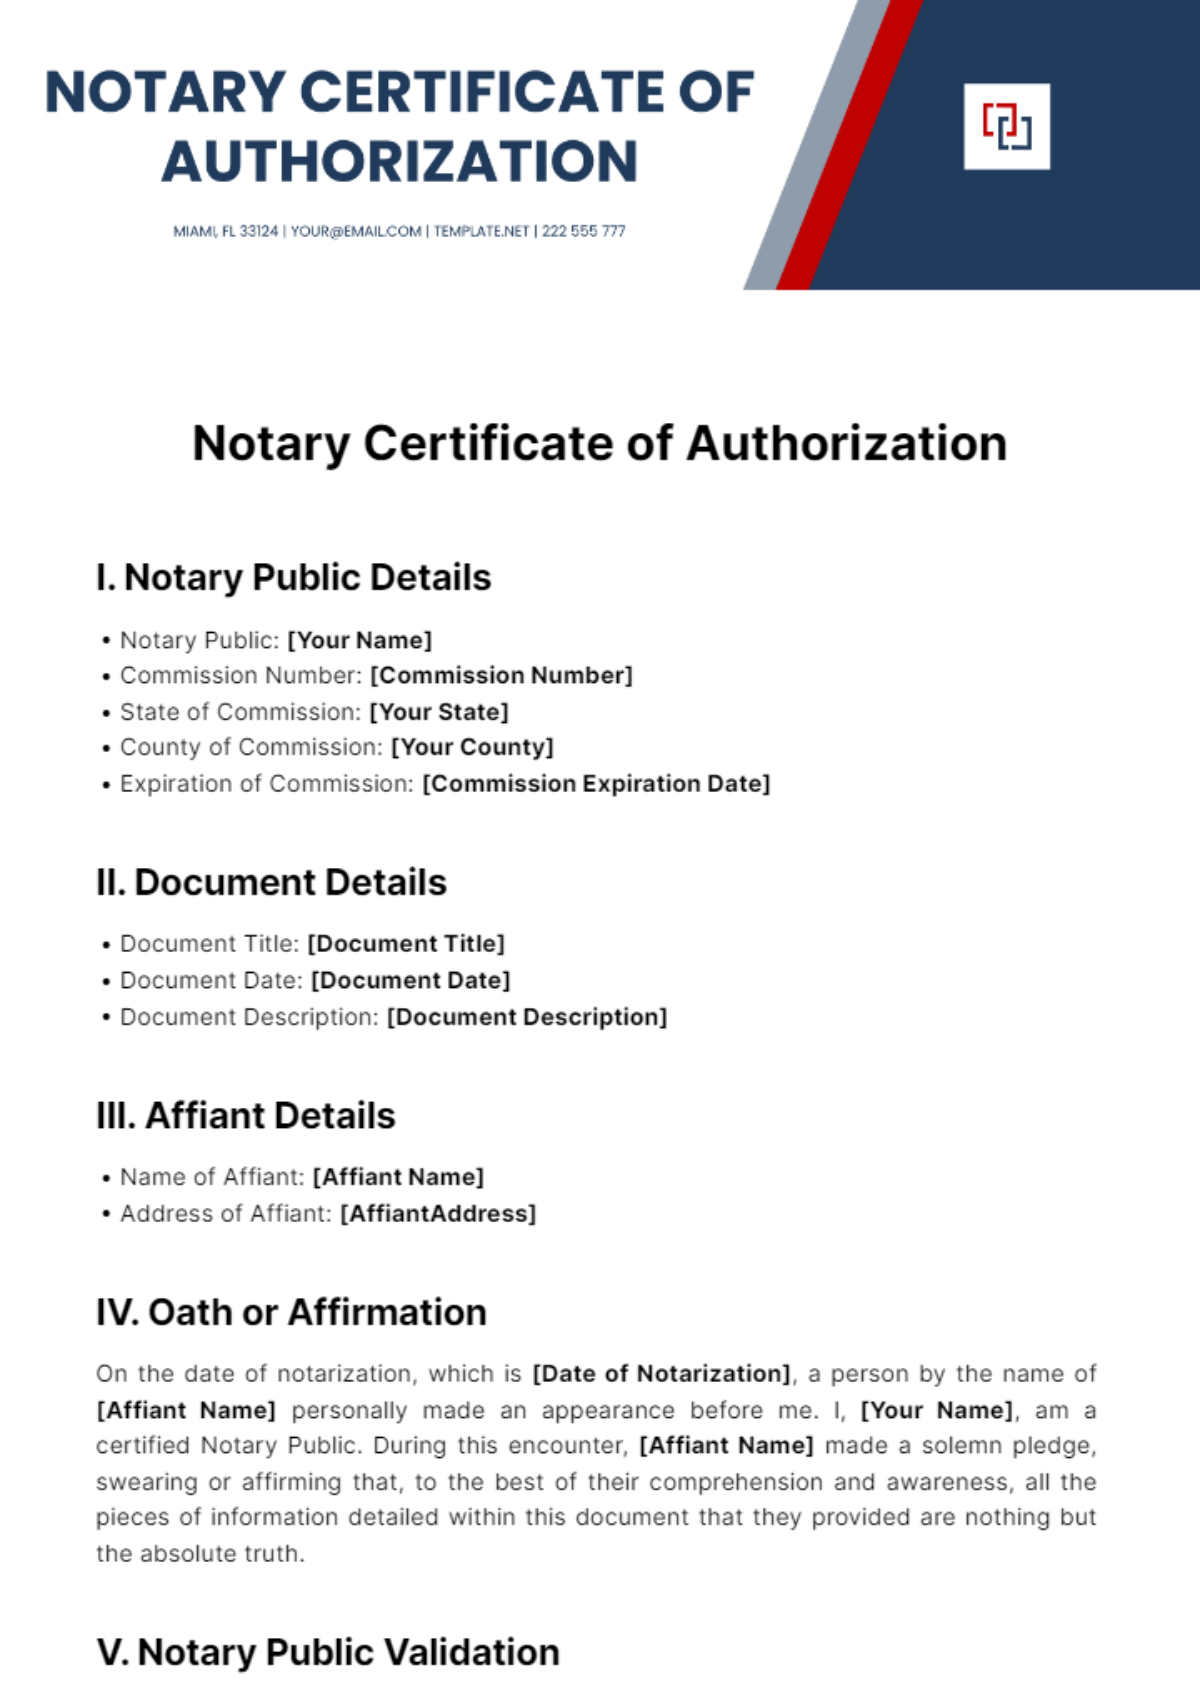 Free Notary Certificate Of Authorization Template